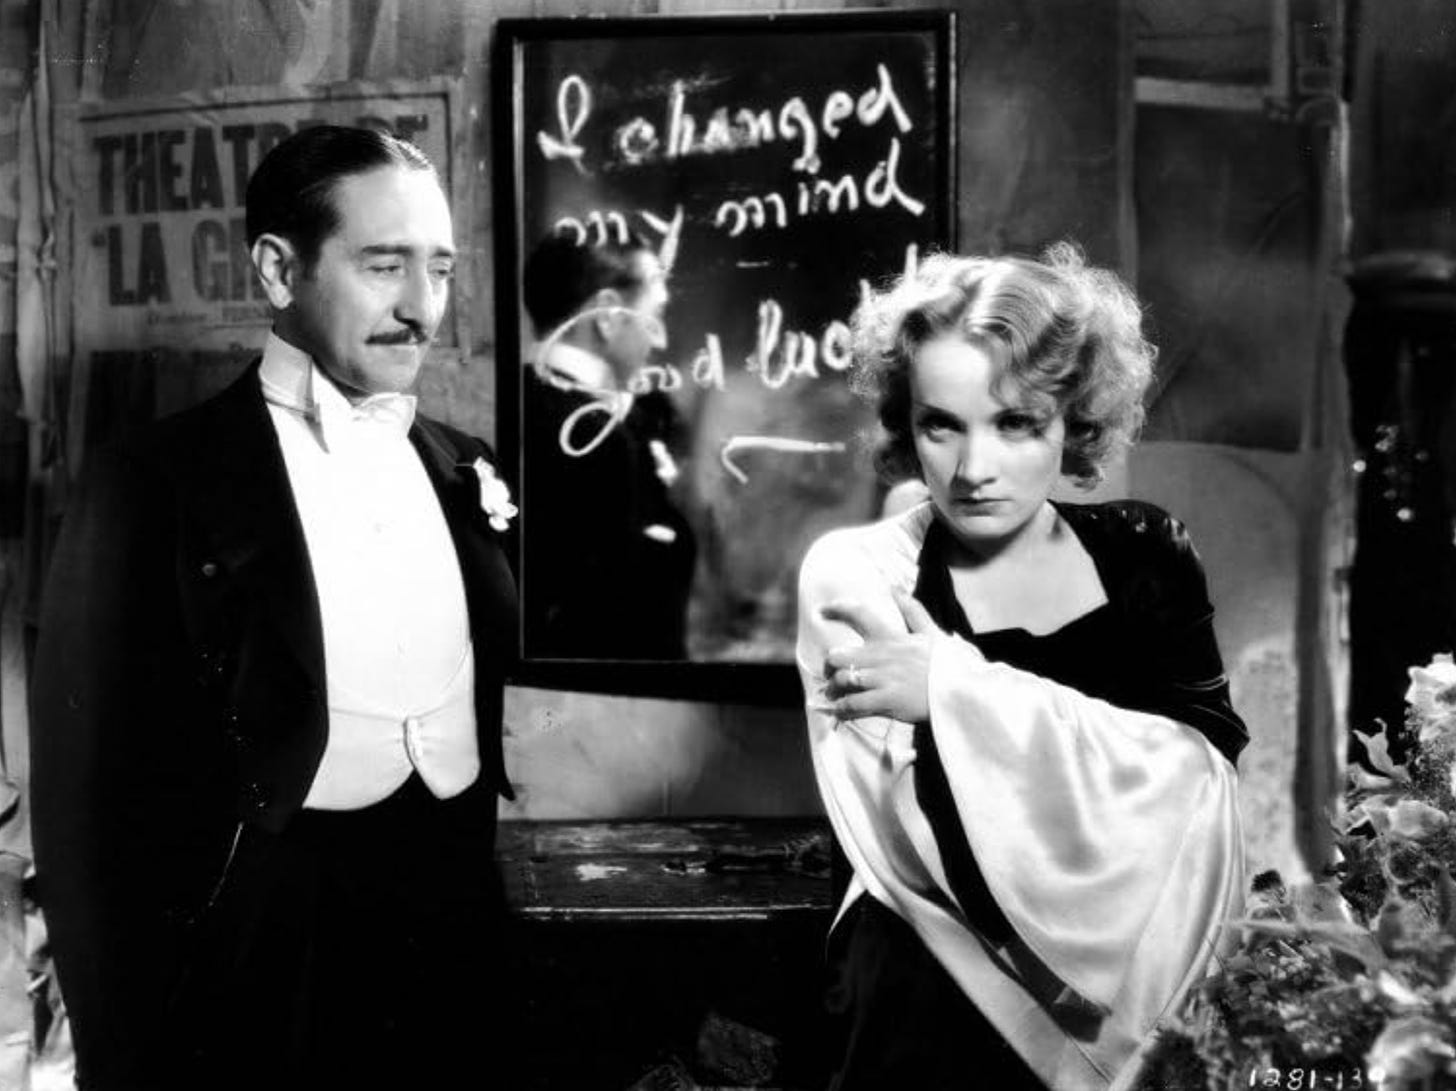 Marlene Dietrich stands in front of a mirror on which is written "I changed my mind. Good luck." in "Morocco" (1930)